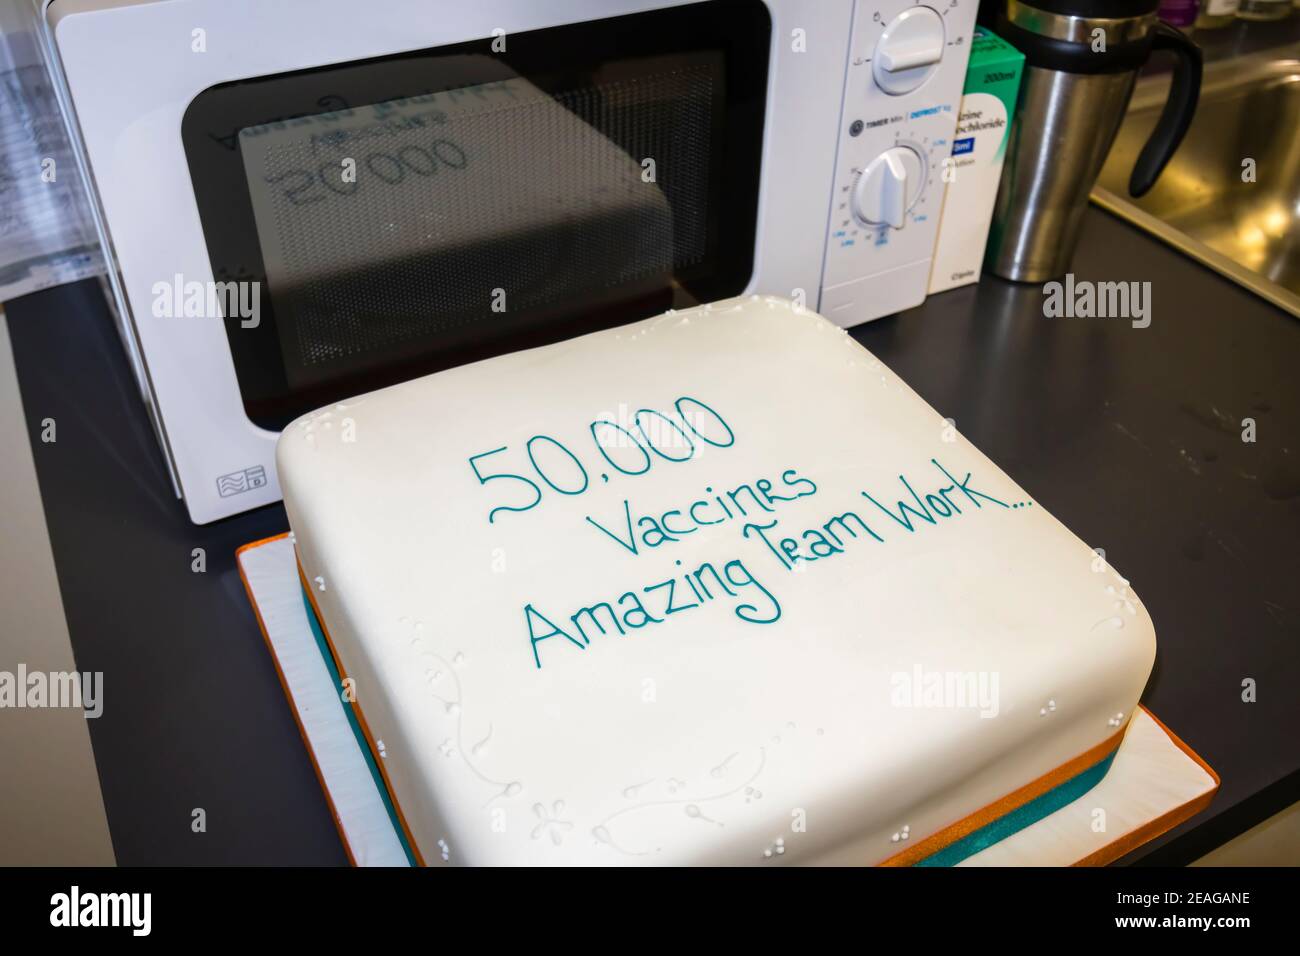 Cake at the Covid-19 vaccinations site in Woking, Surrey, south-east England celebrating 50,000 vaccines by the local NHS staff team Stock Photo